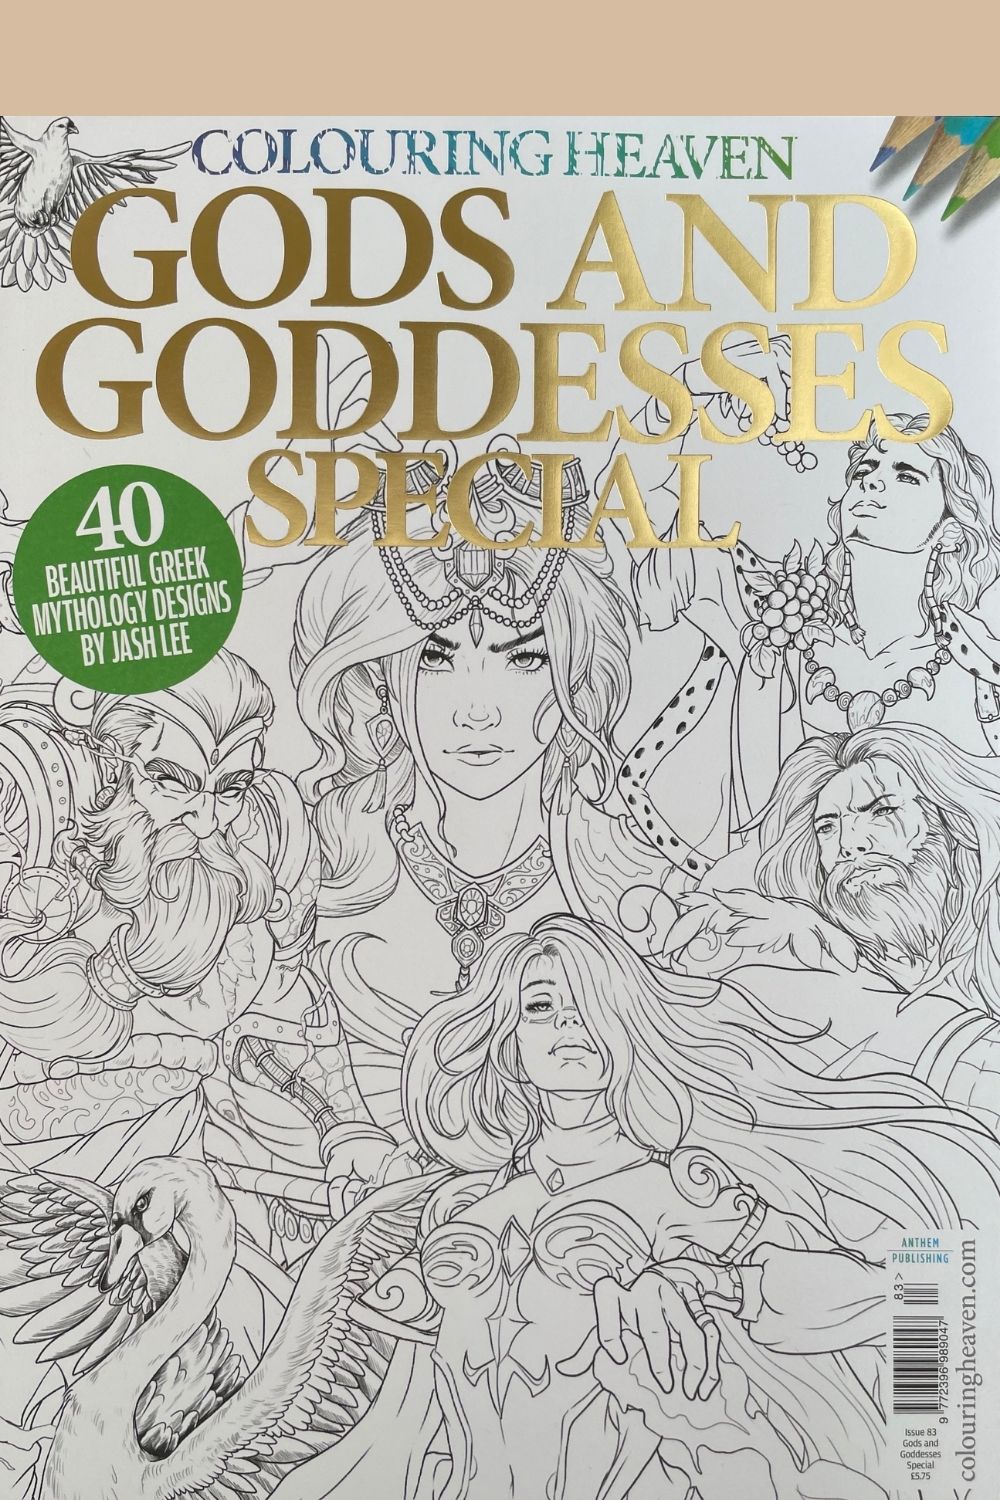 Colouring Heaven #83 Gods and Goddesses Special